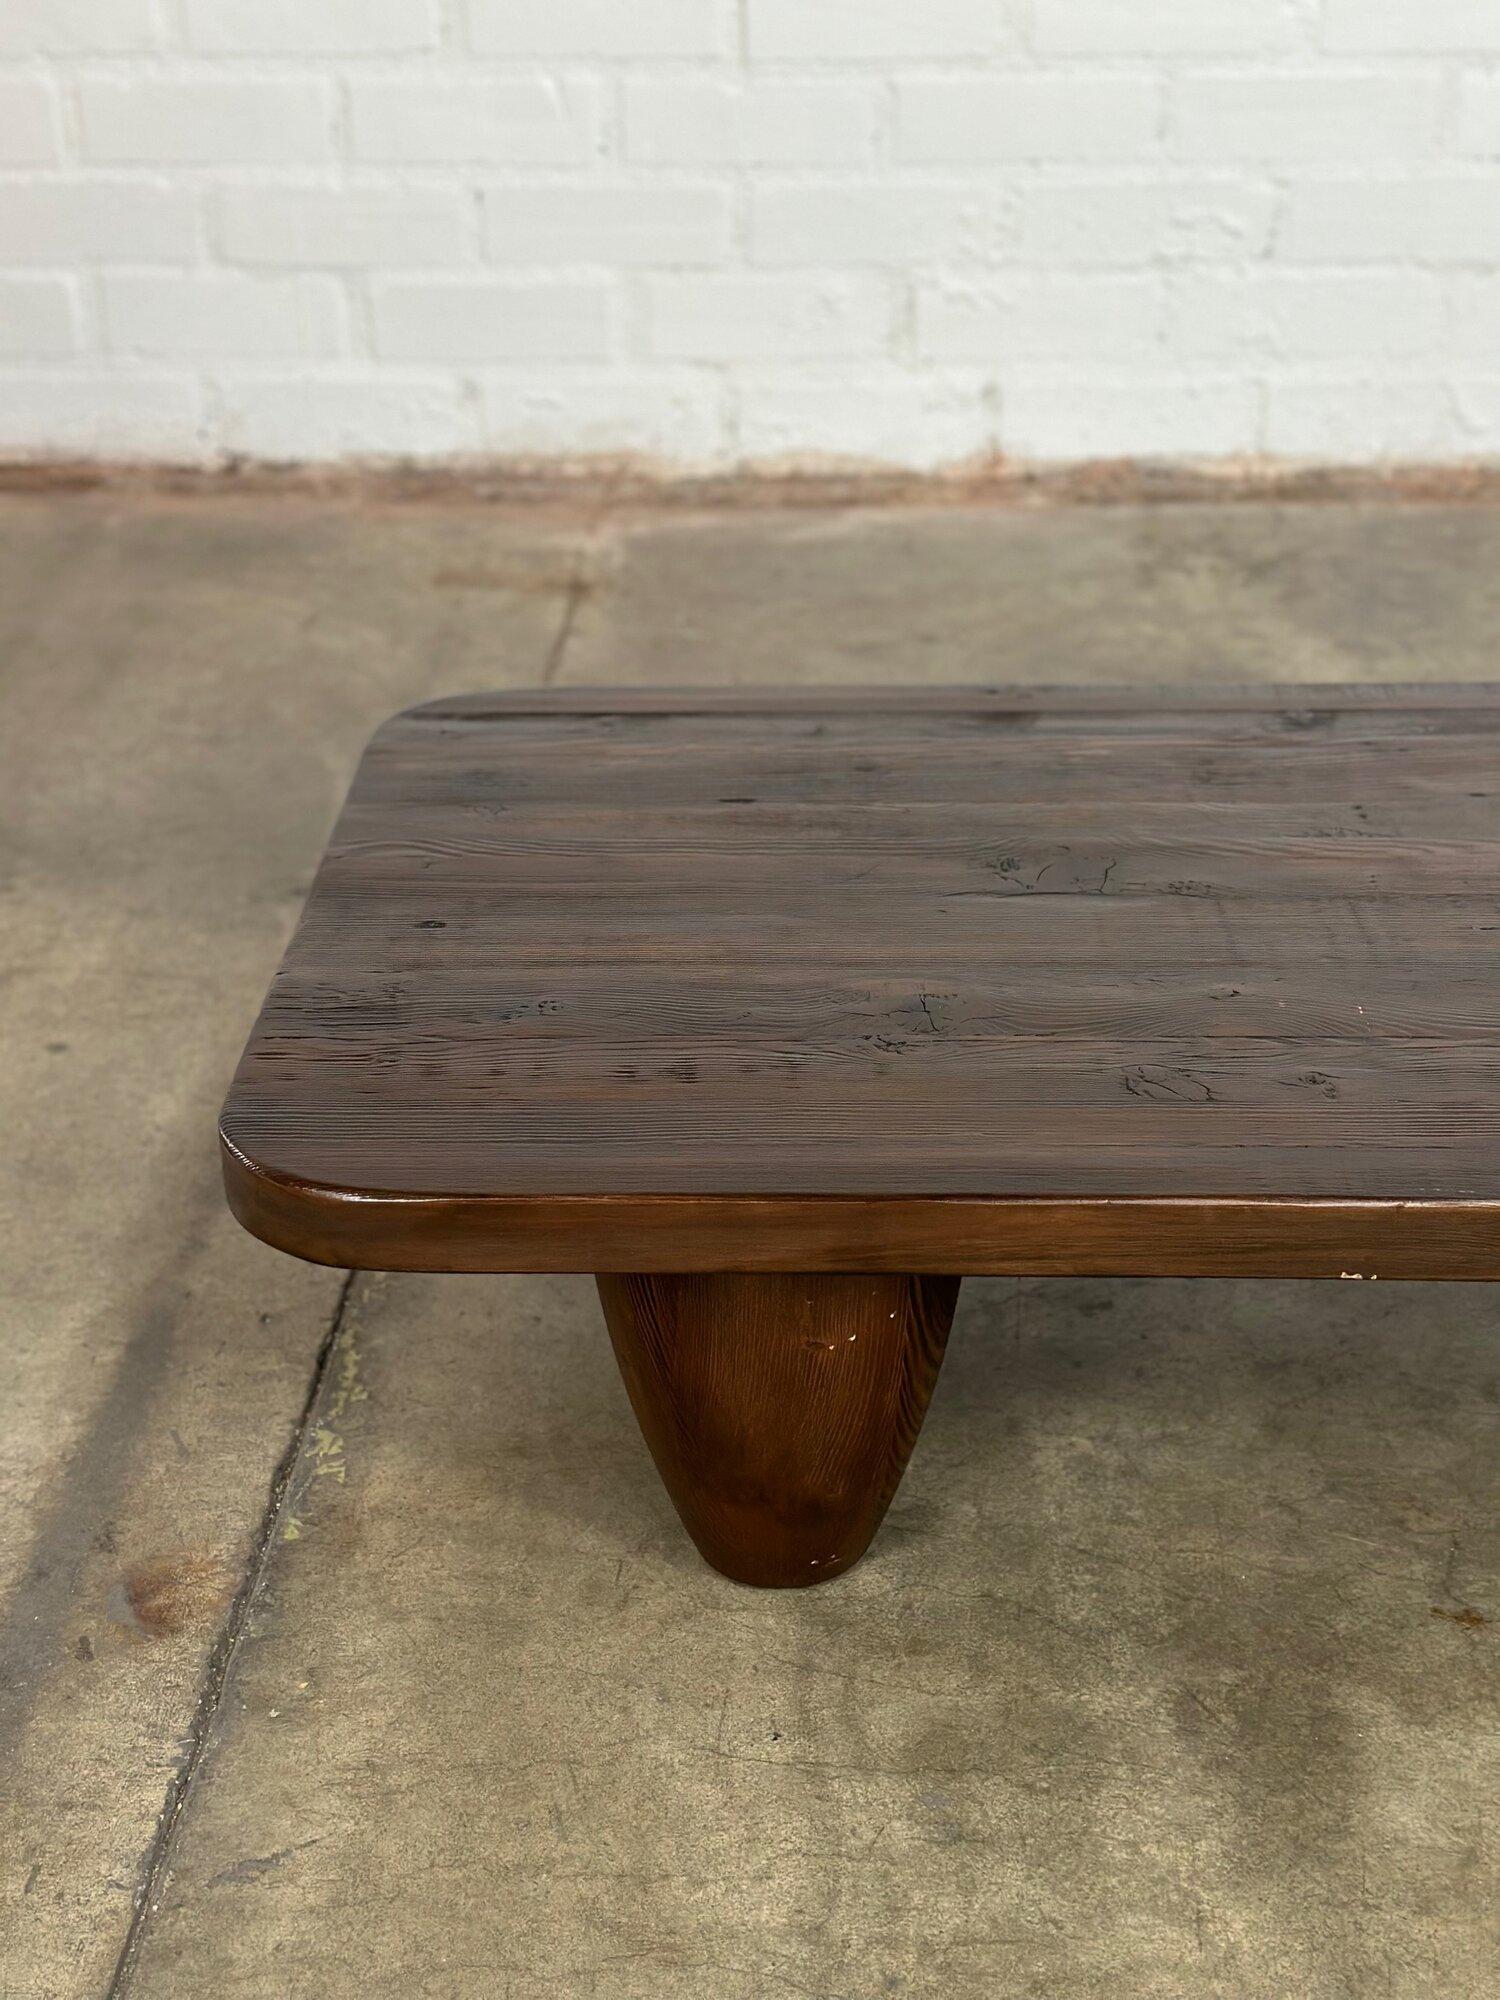 W76 D24 H11

This beautifully made coffee table has just landed in a dark brown ebony like stain. There are minor sign of wear, but over all very good condition. The legs can be screwed off.

Light brown version available, listed separately.